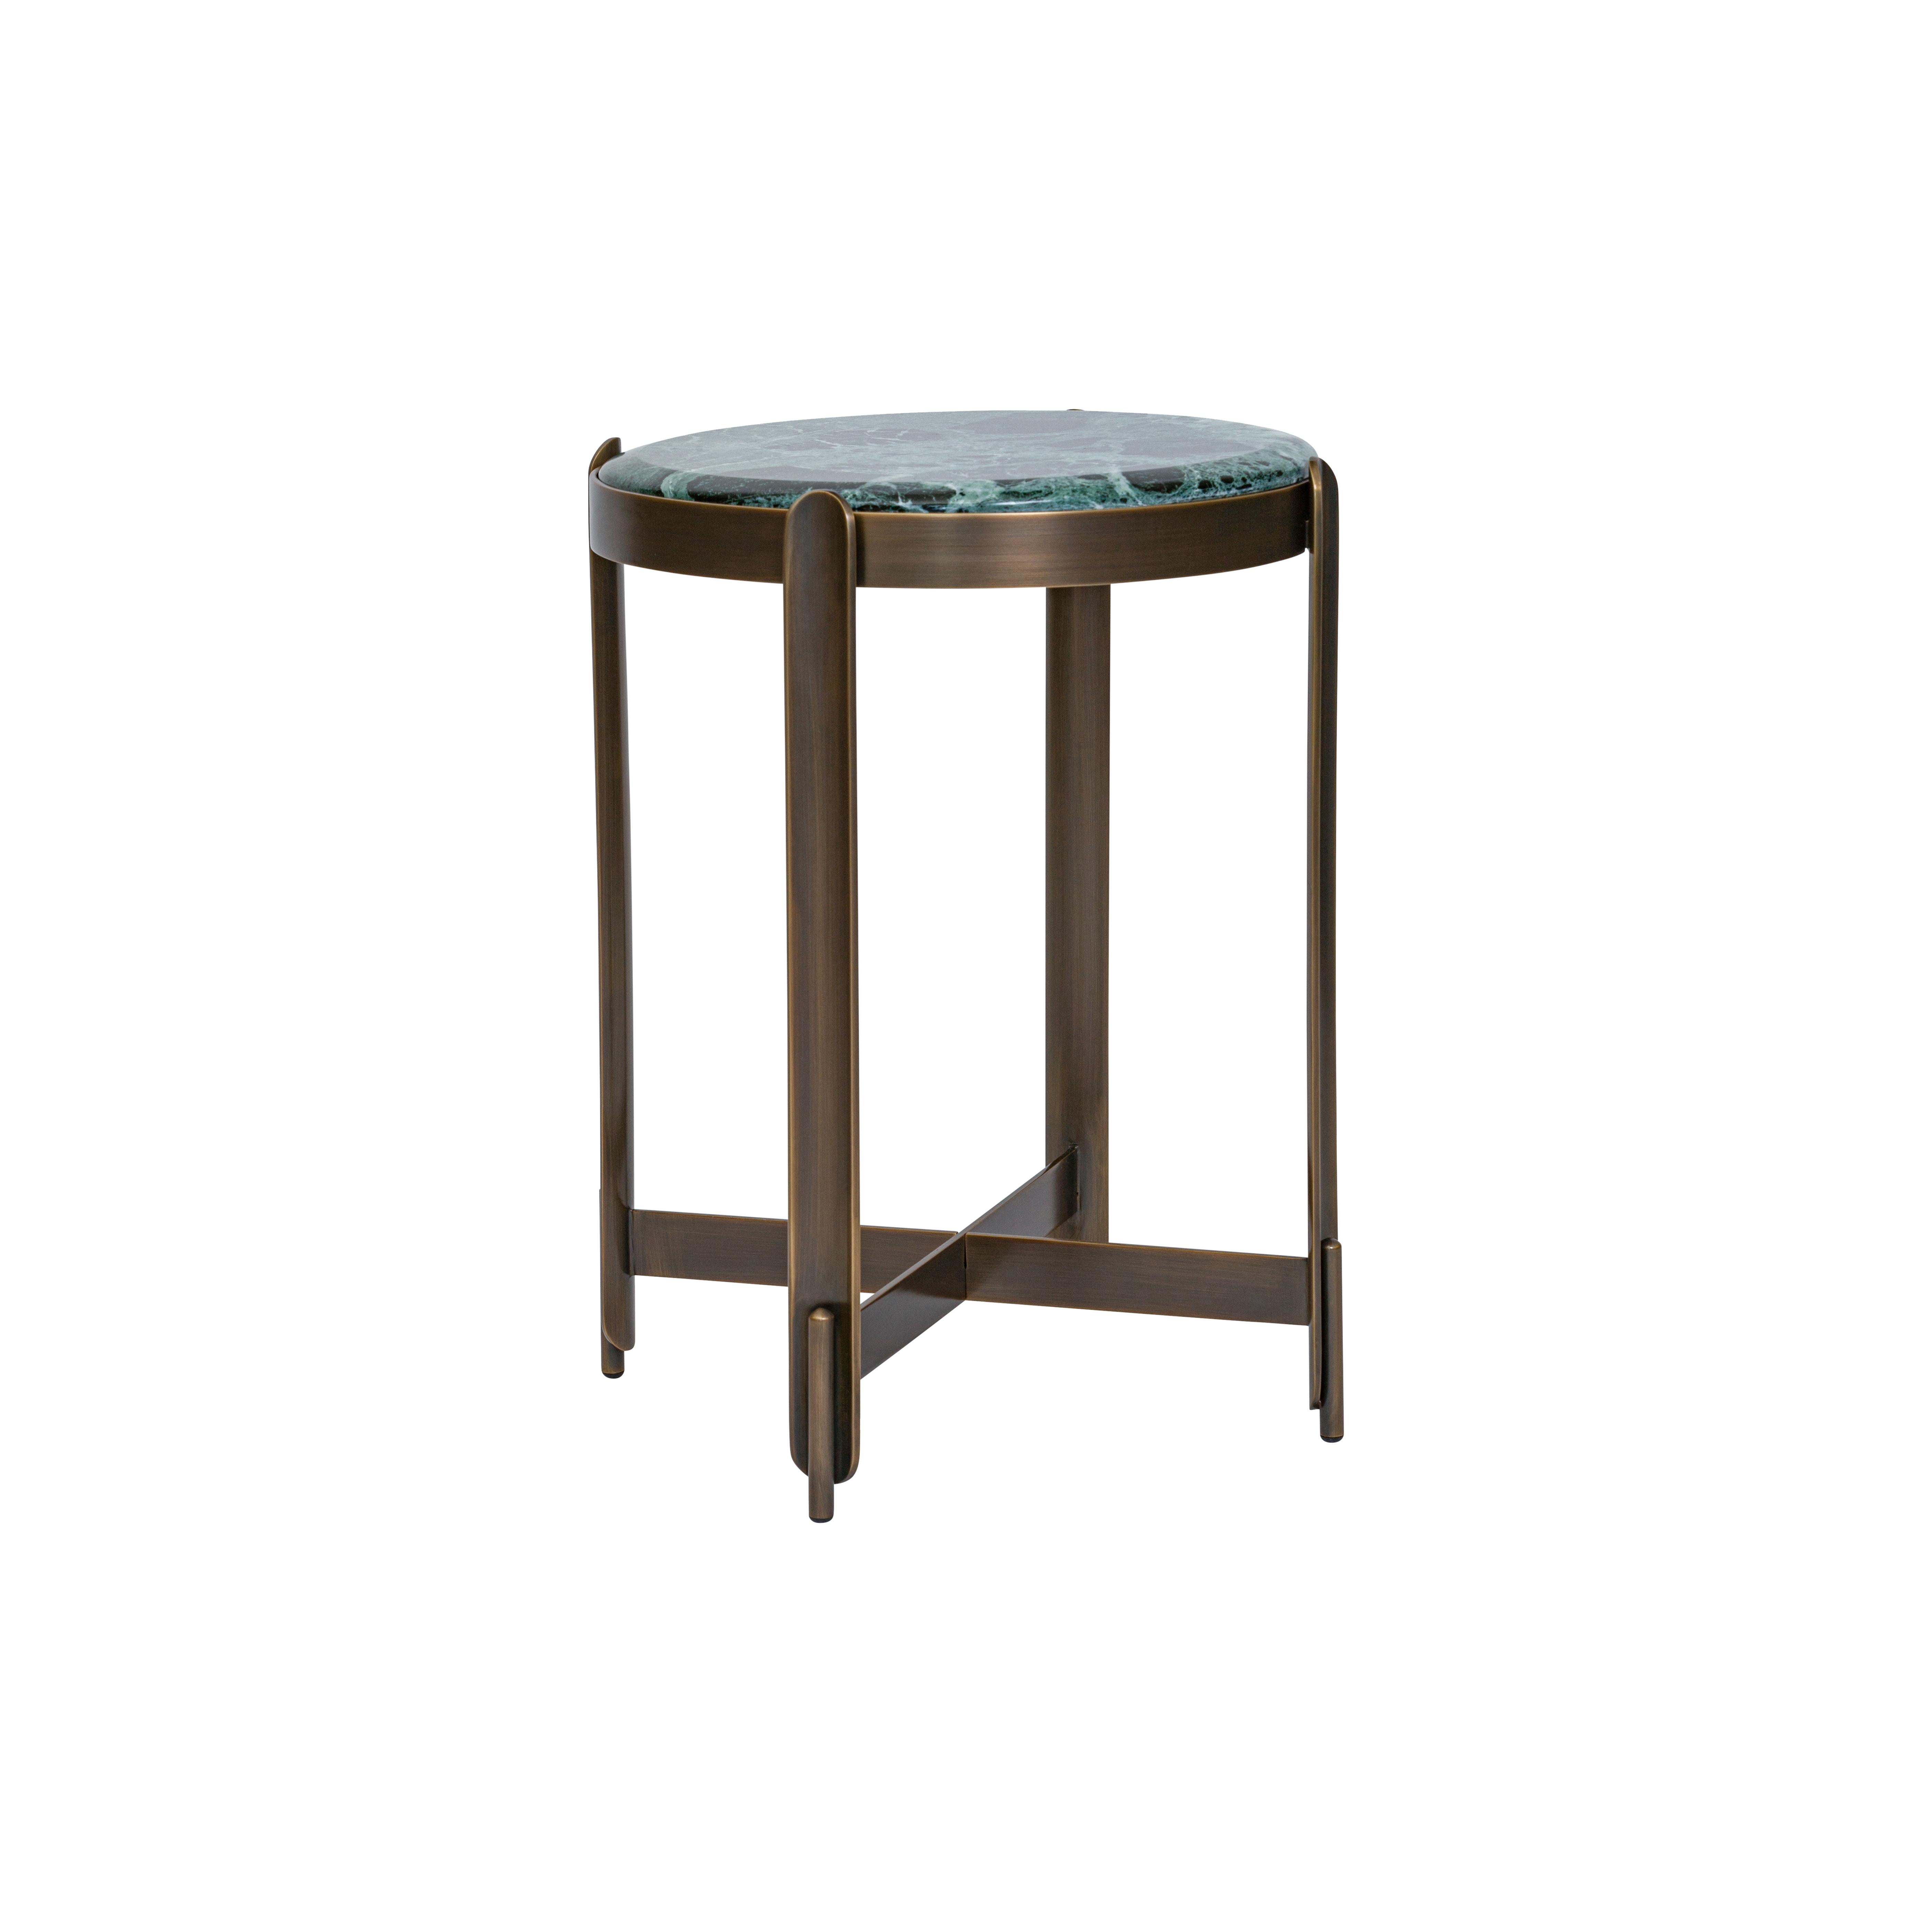 21st Century Art Déco Elie Saab Maison Alpine Green Bronzed Side Table, Italy

Named after its strategic position in interiors, the Zenith low tables and consoles add a refined and contemporary glamour to each room. Series of low tables, consoles